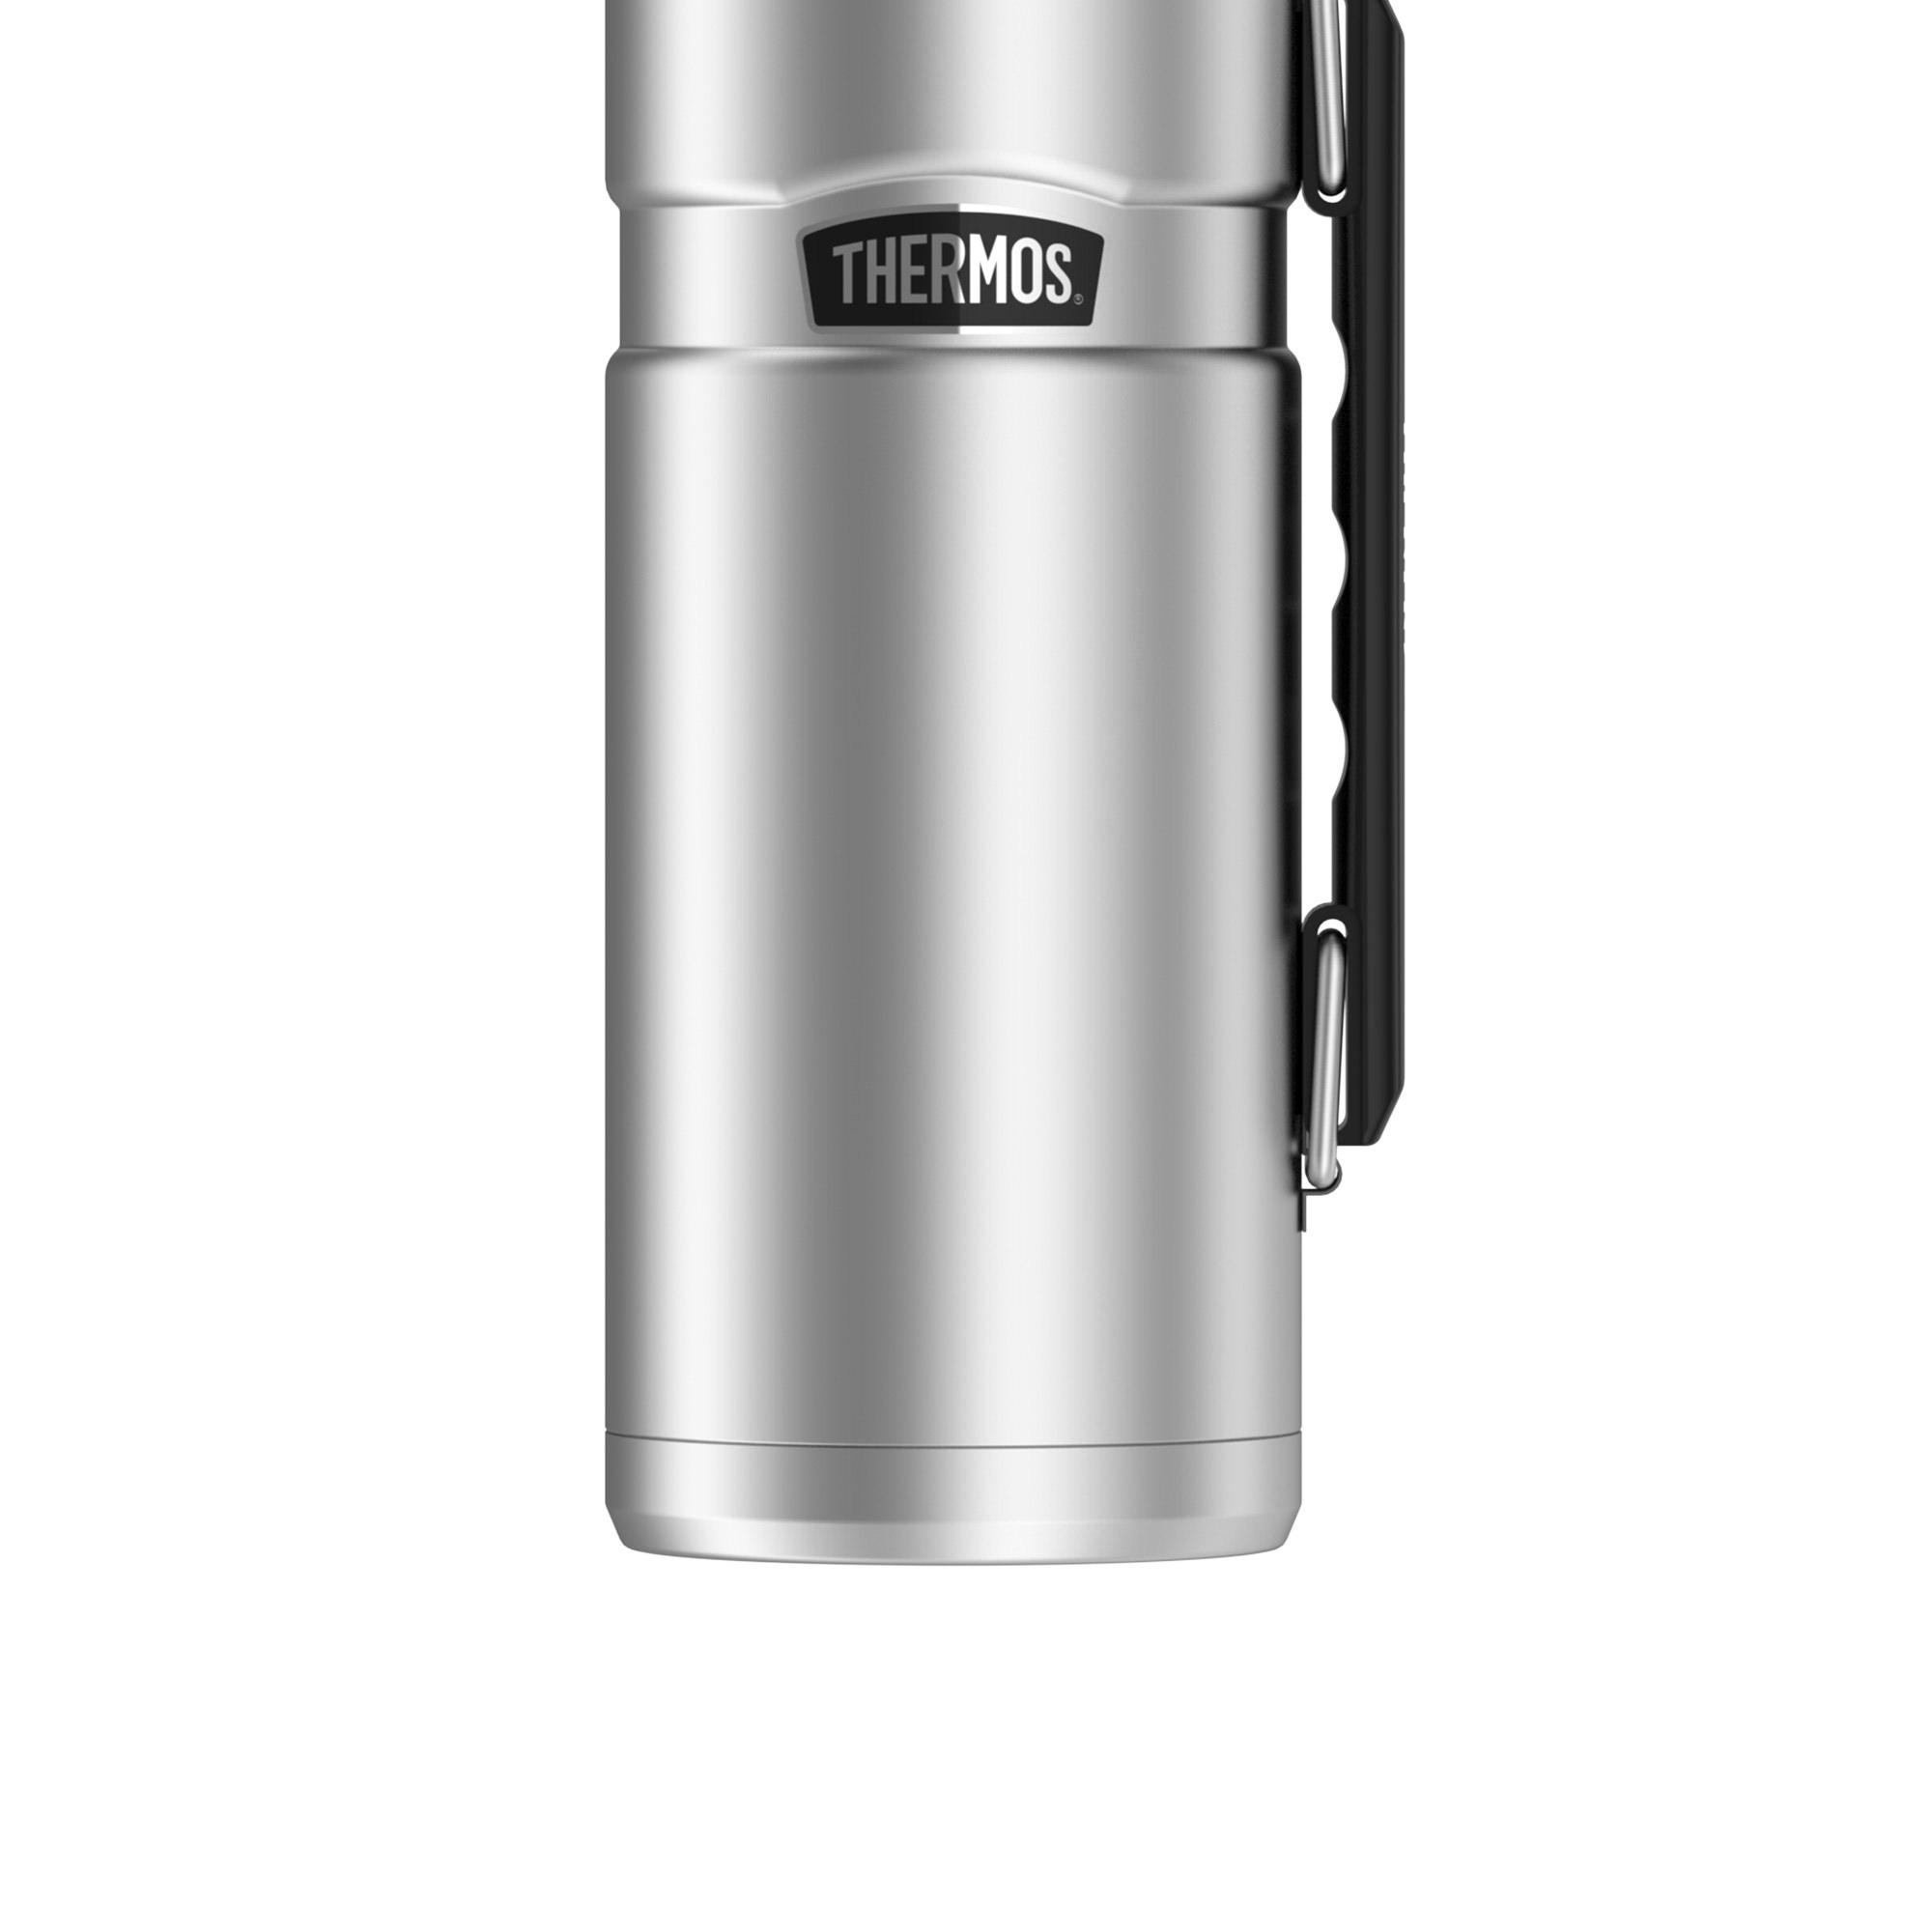 Thermos Stainless King Insulated Flask 1.2L Stainless Steel Image 3